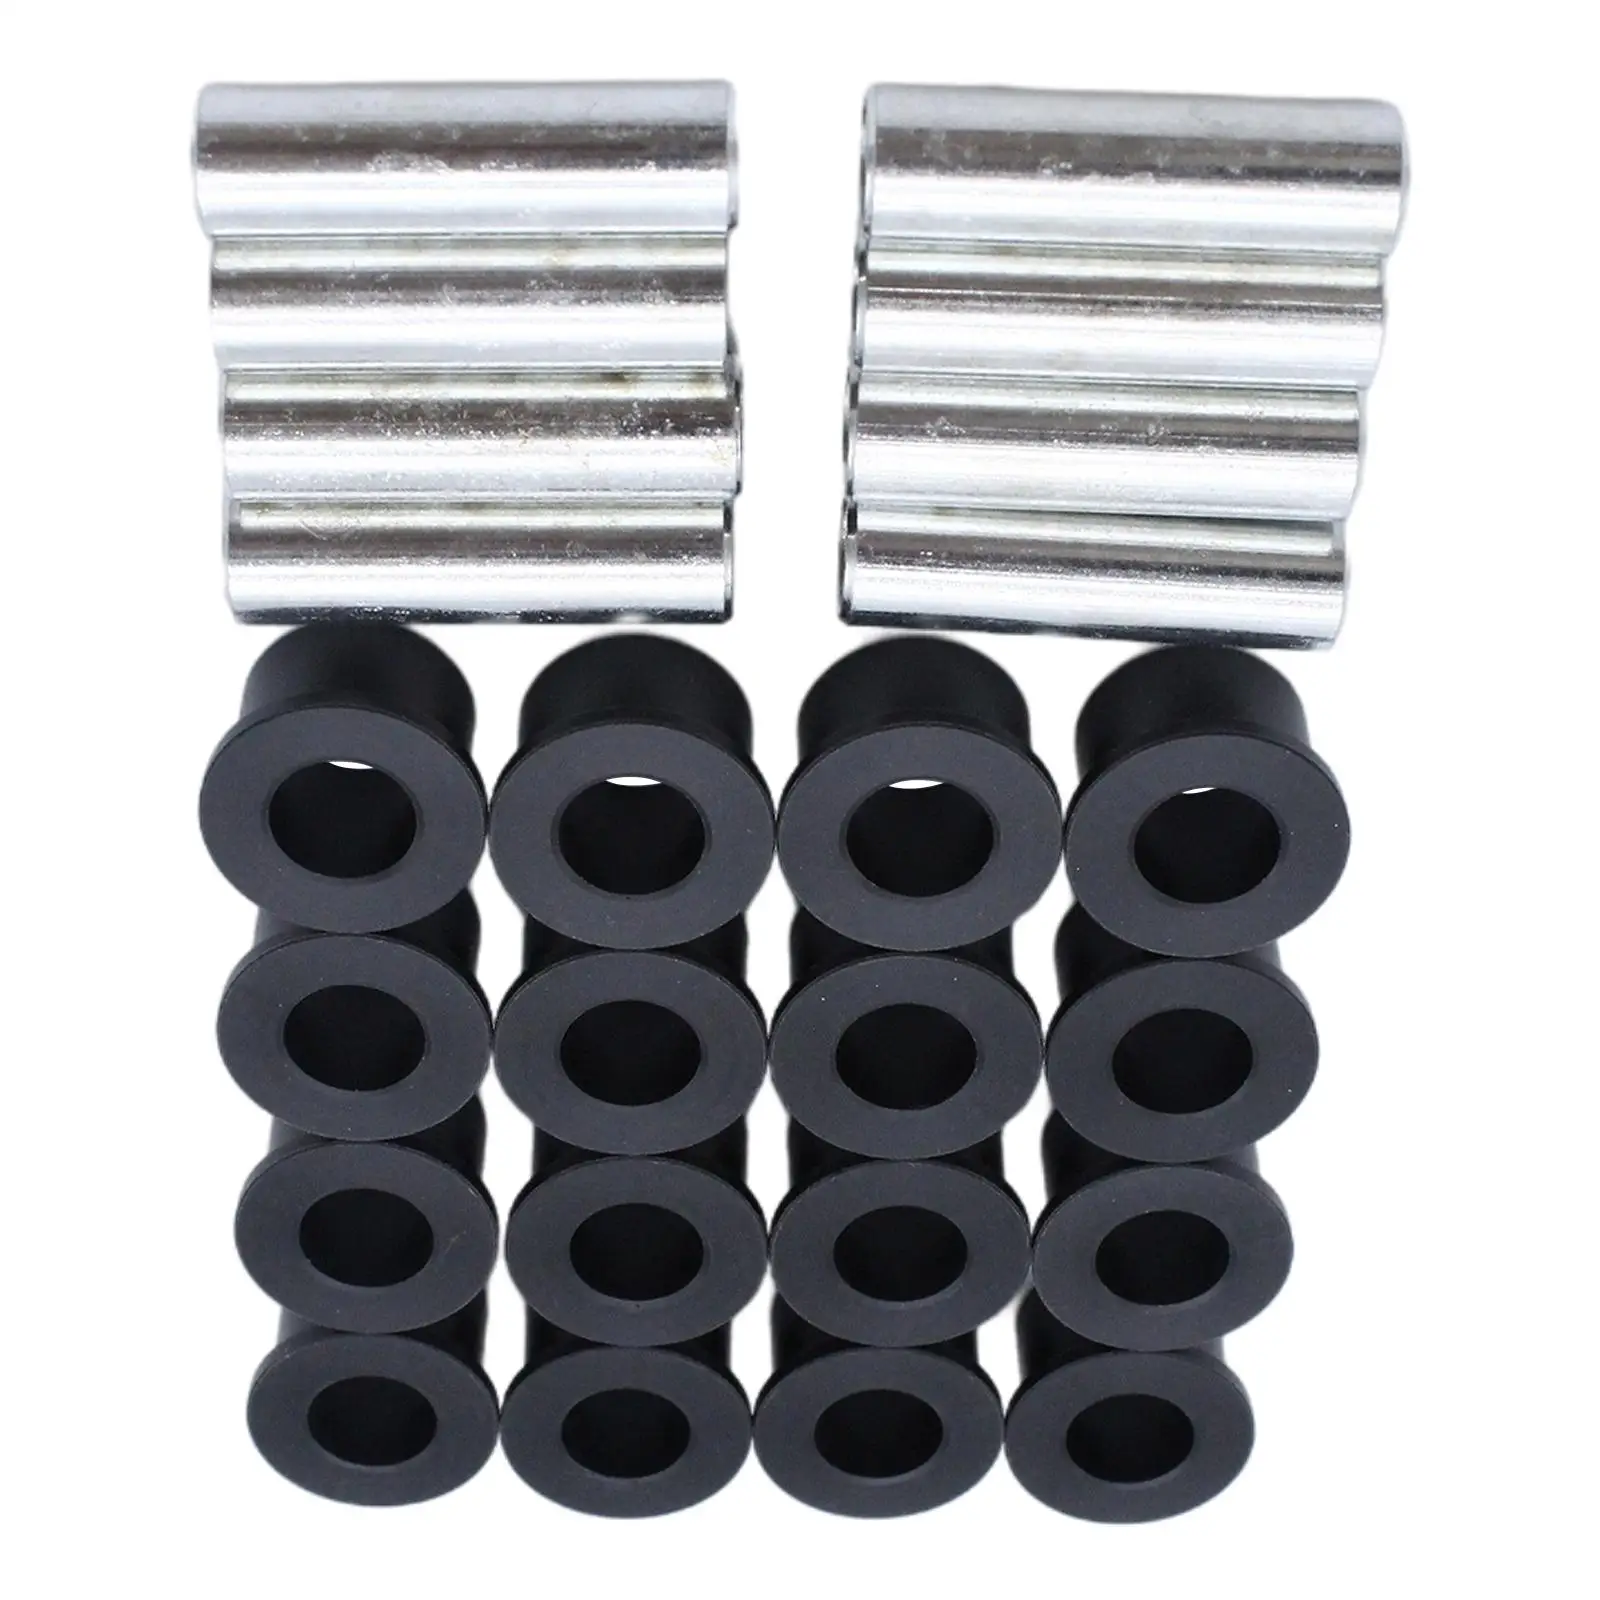 Car Set Throttle Shaft Bushing Direct Replaces fits for TRX400X 2012